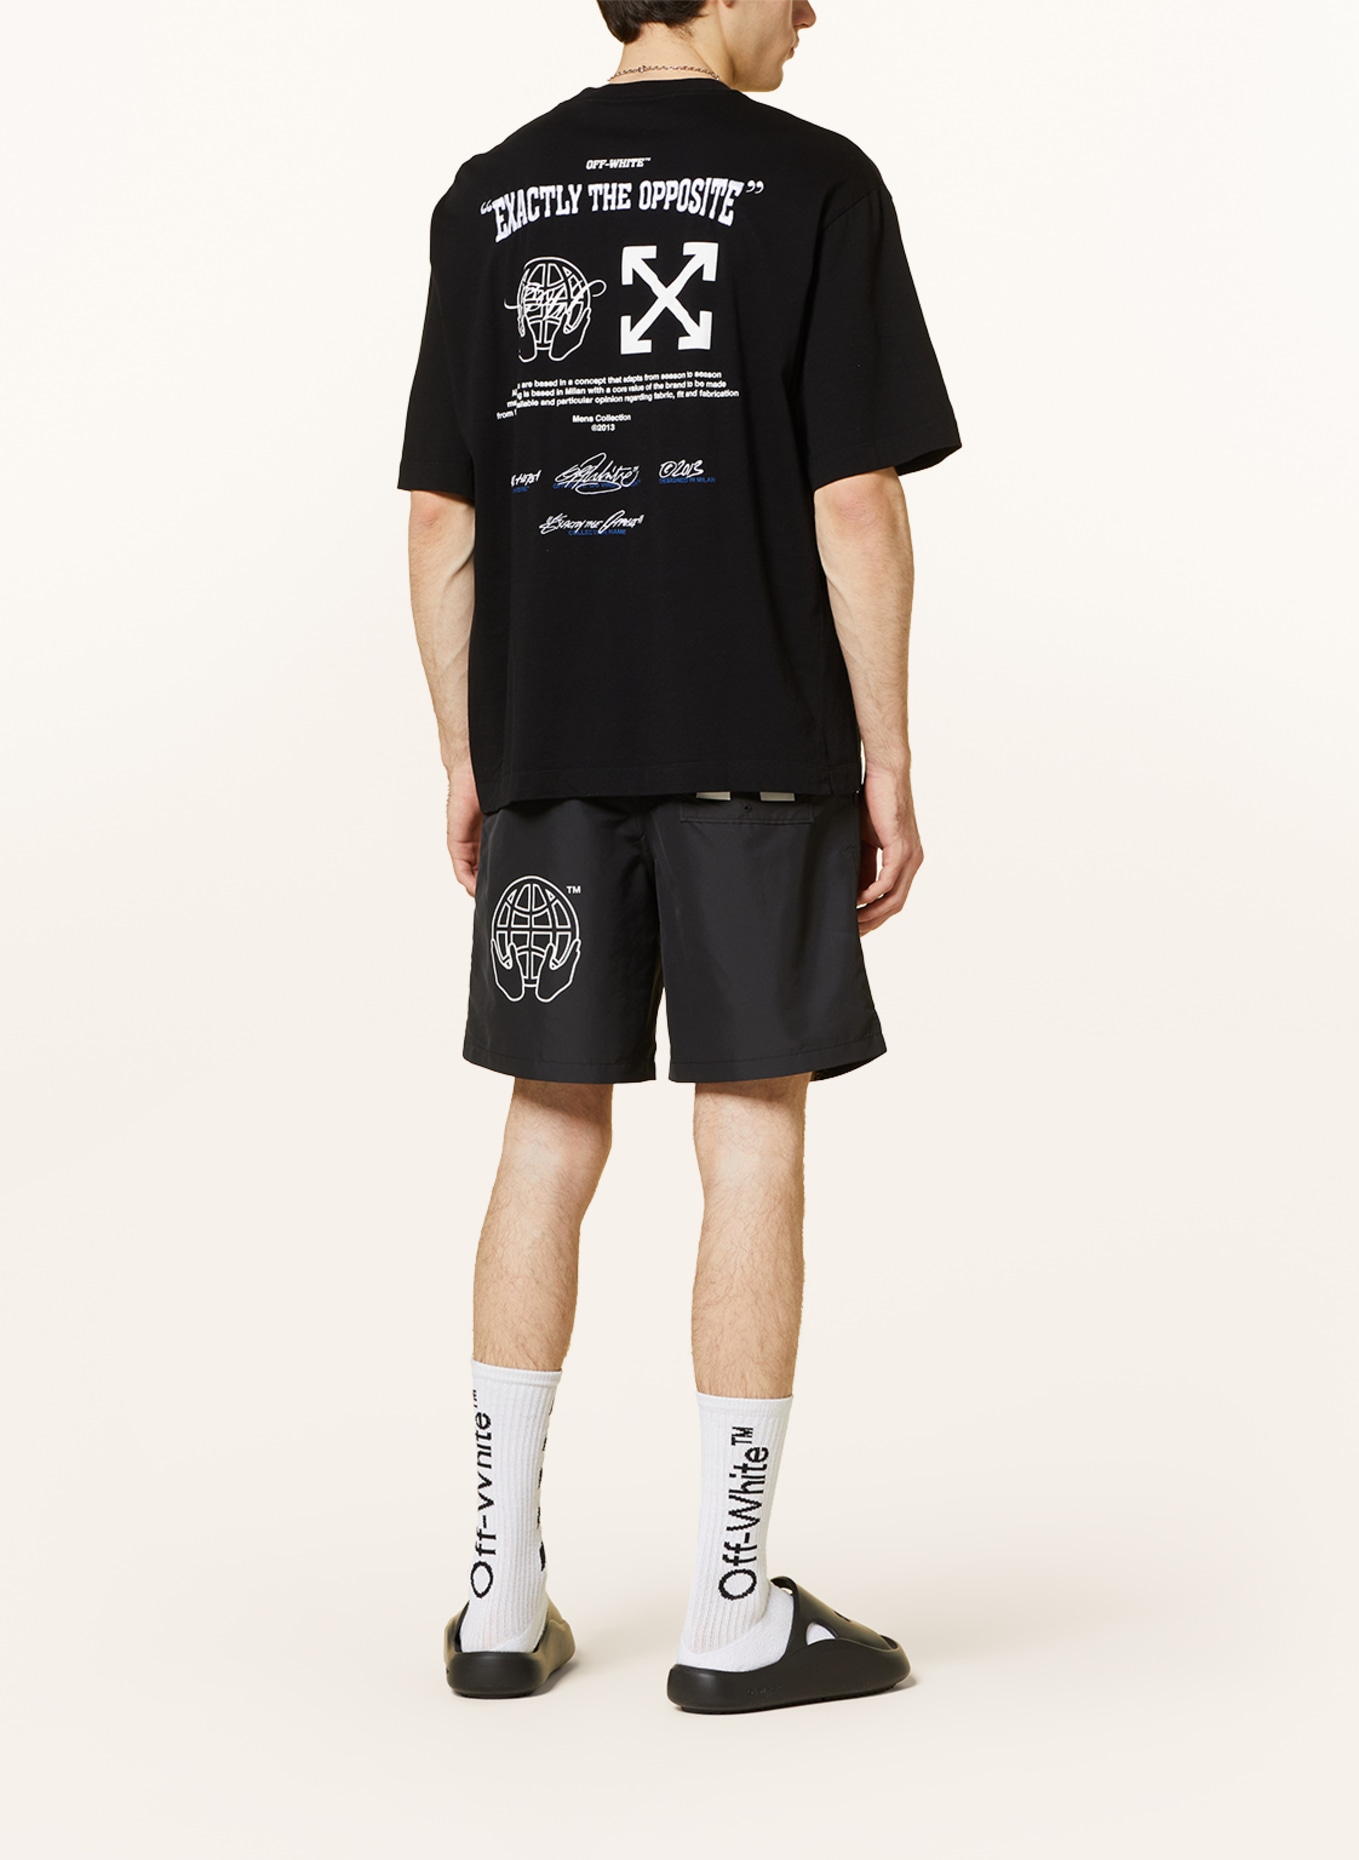 Off-White: Black 'Exactly The Opposite' T-Shirt